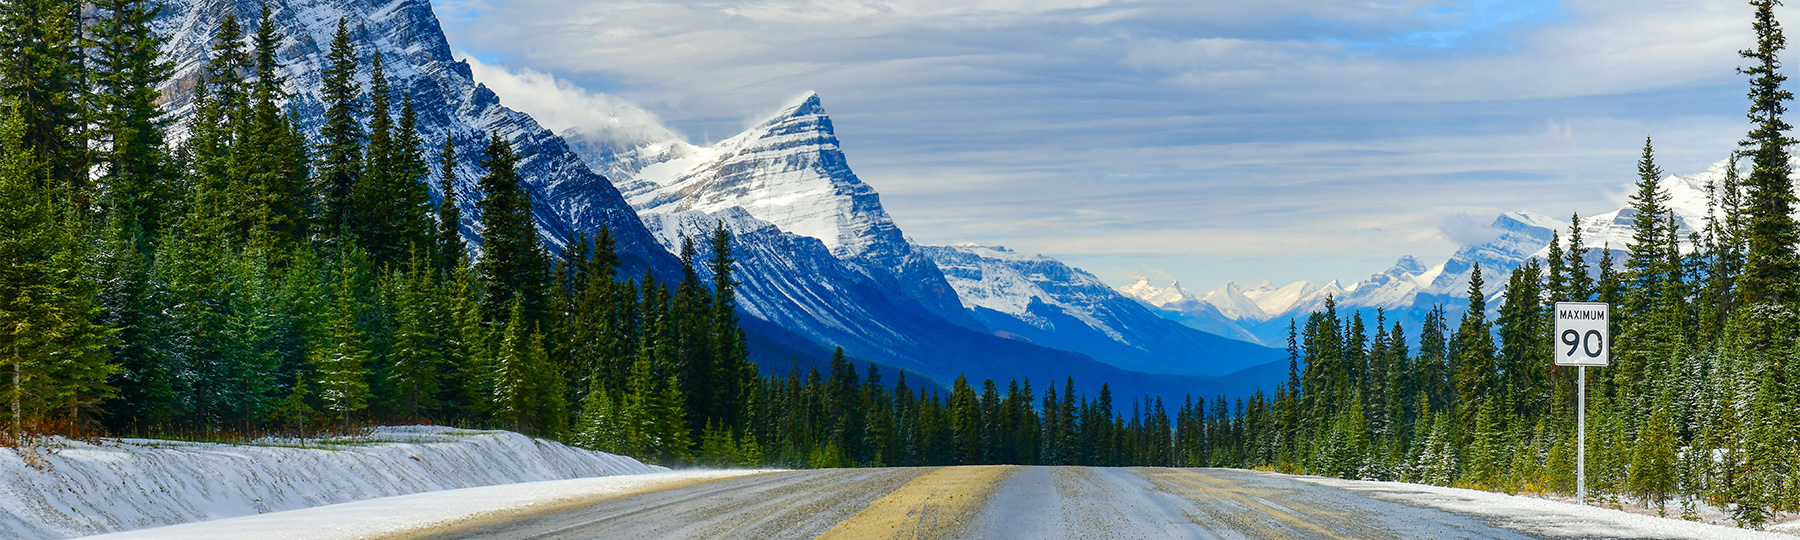 Photo of a Canadian Highway with a mountain backdrop